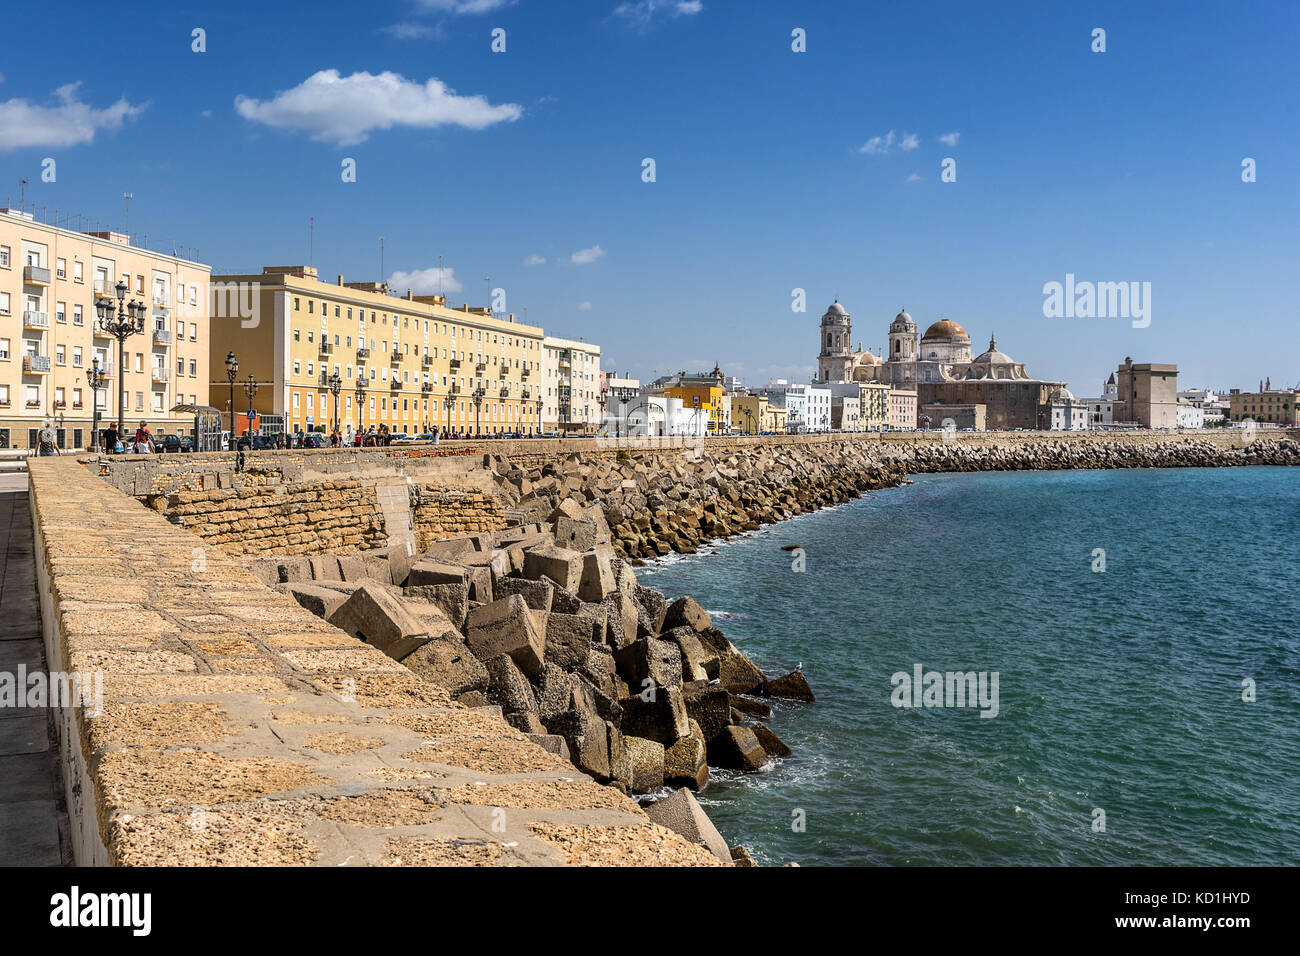 The waterfront in the Spanish city of Cadiz Stock Photo